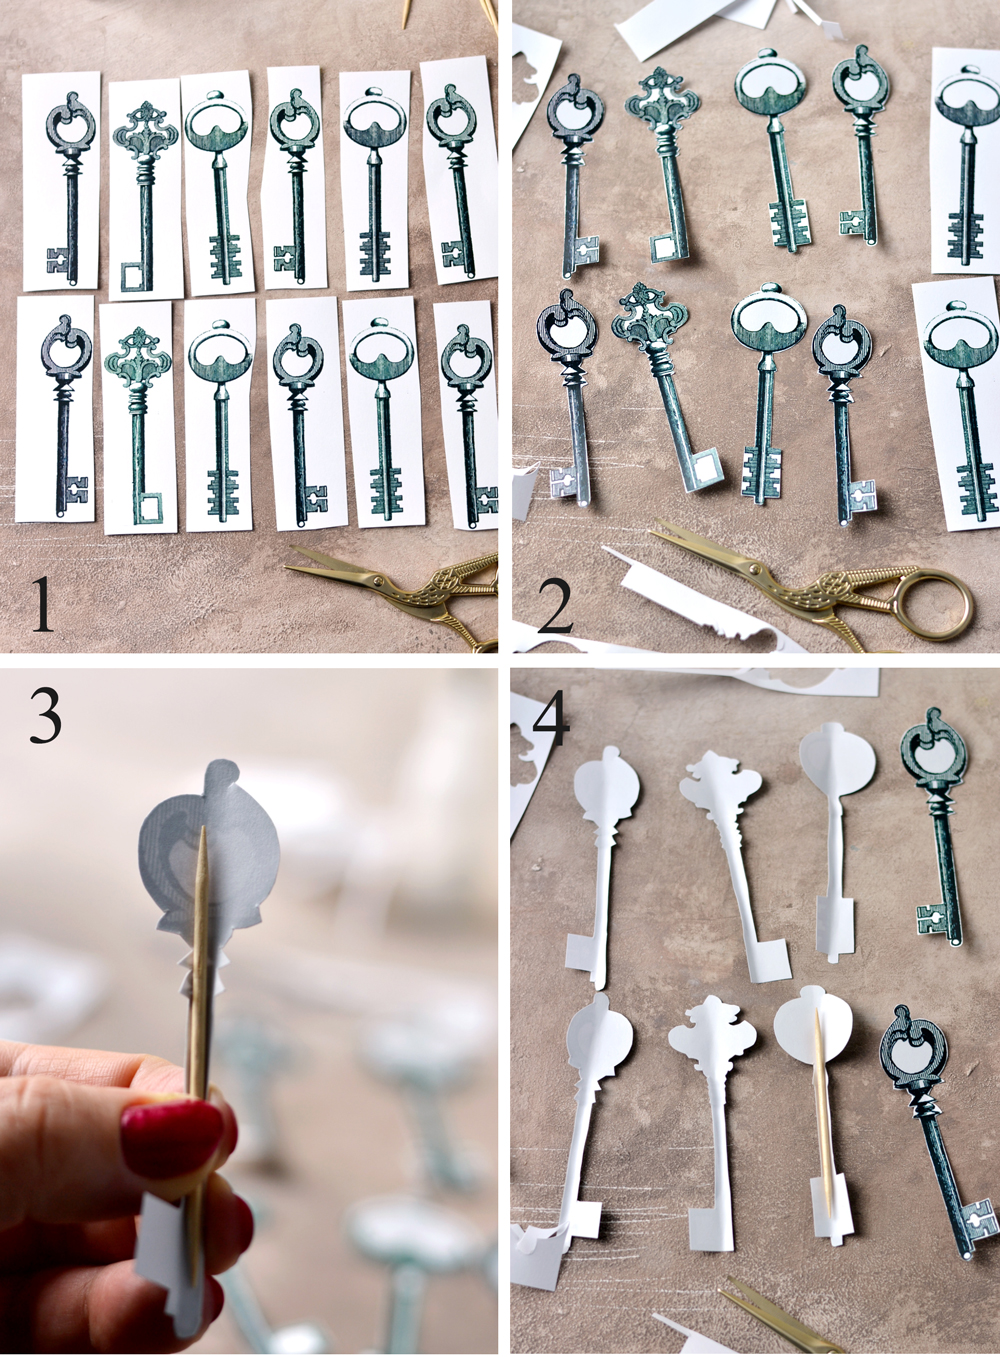 Printable with skeleton keys cutting out